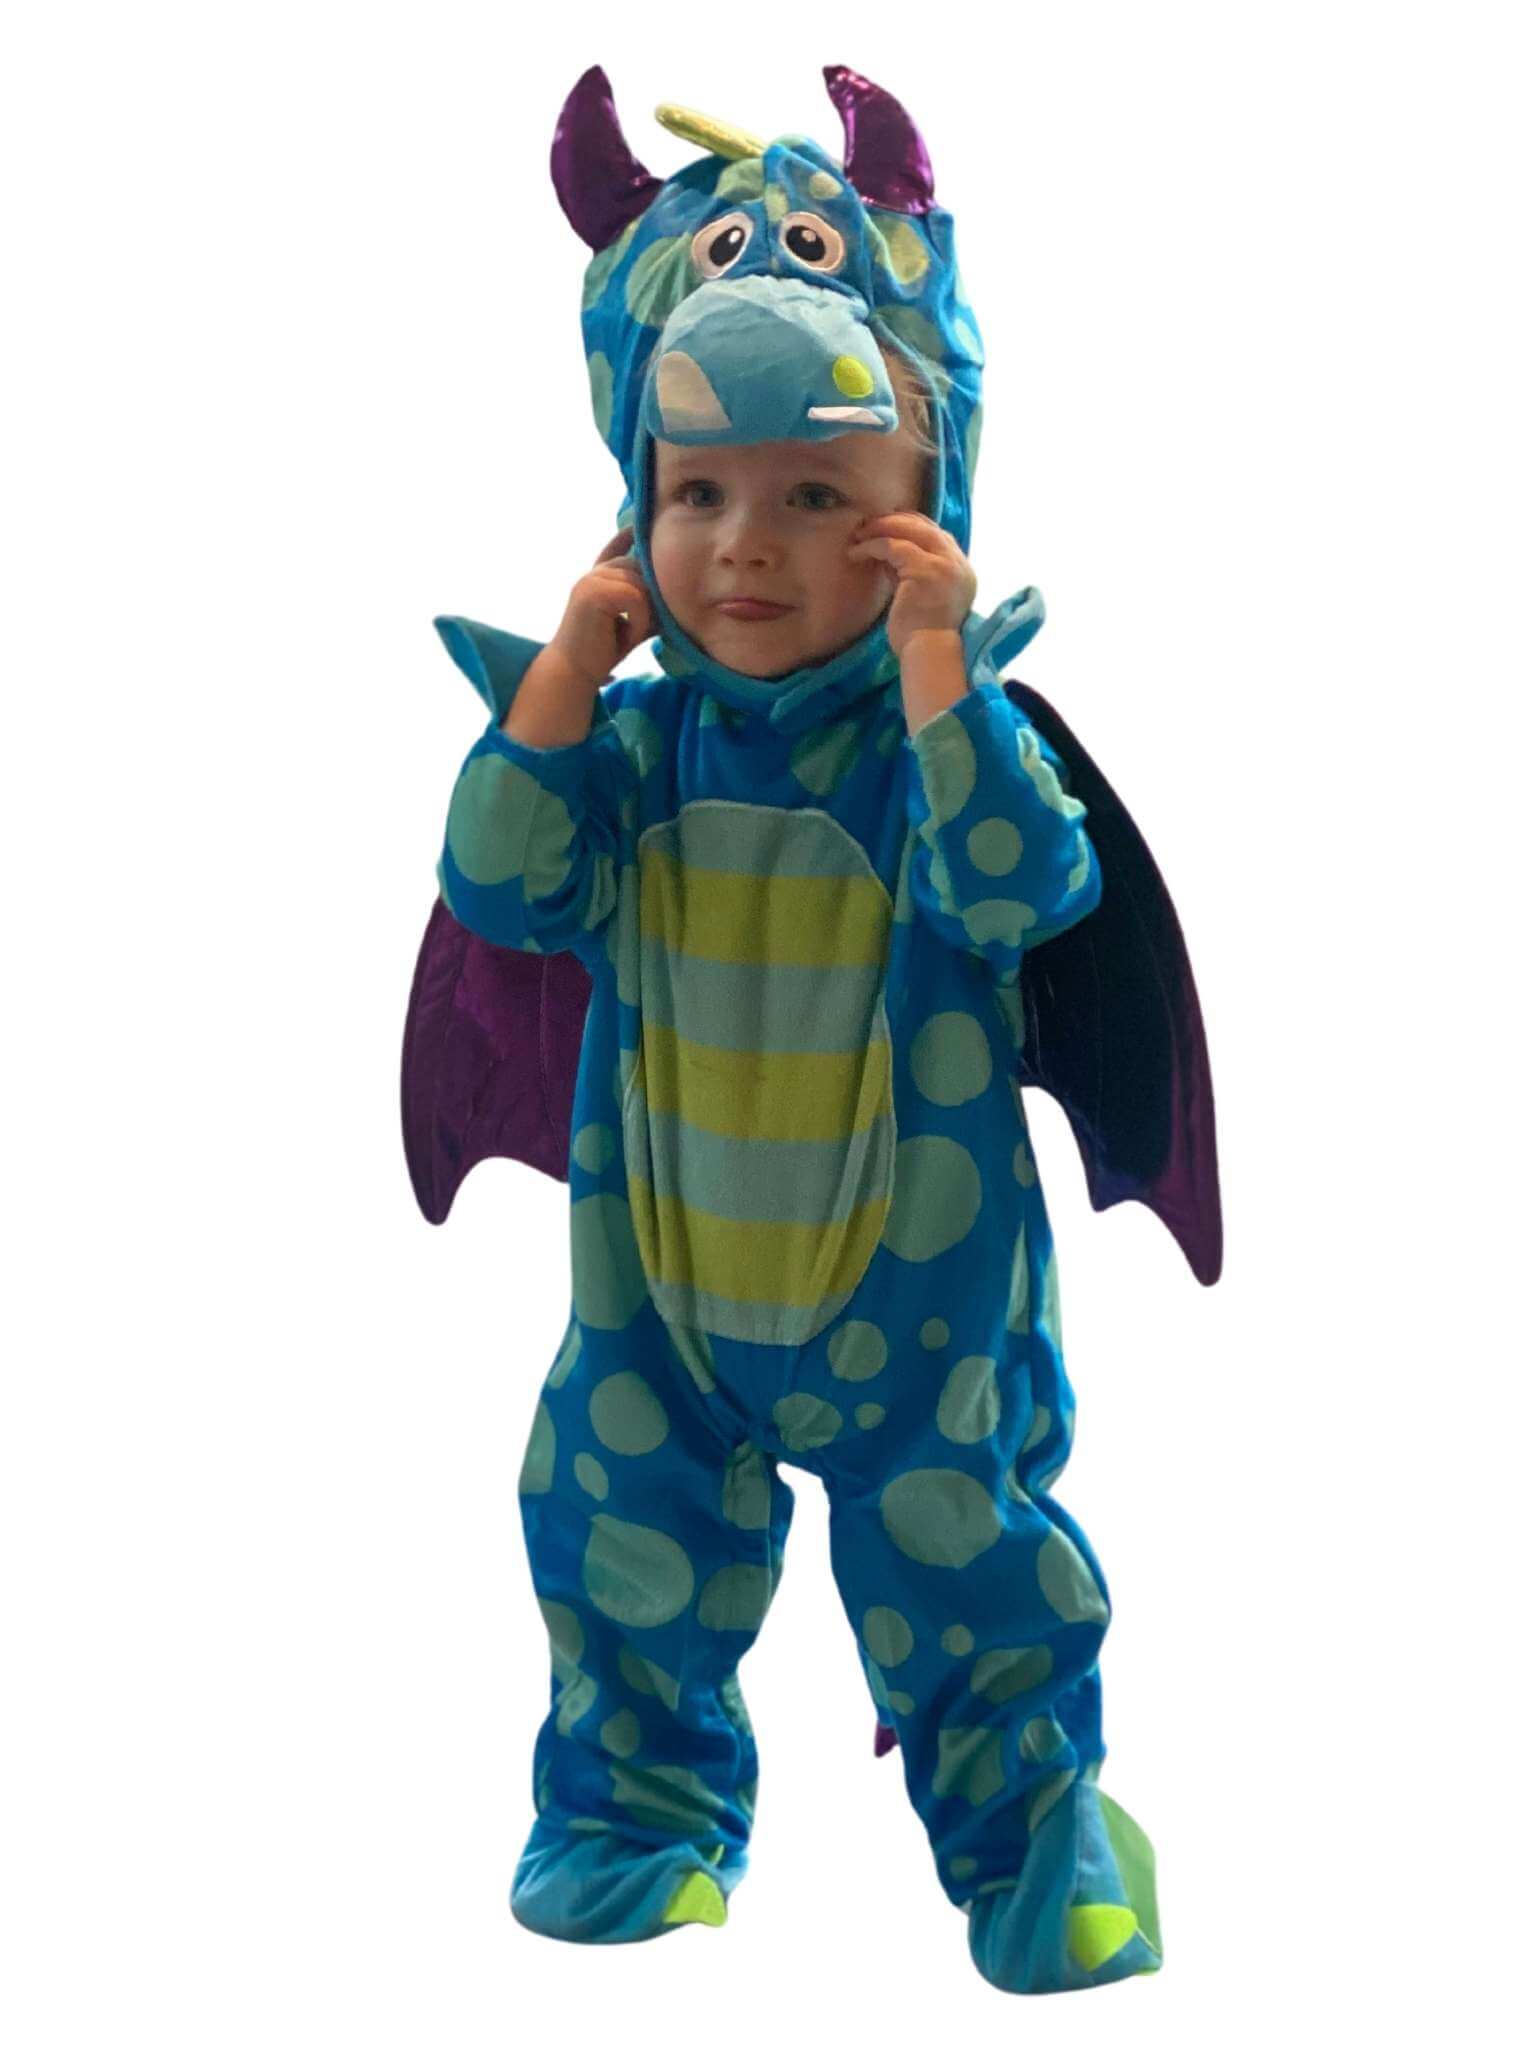 Toddler wearing blue and green spotty dragon costume sticking their tongue out. 